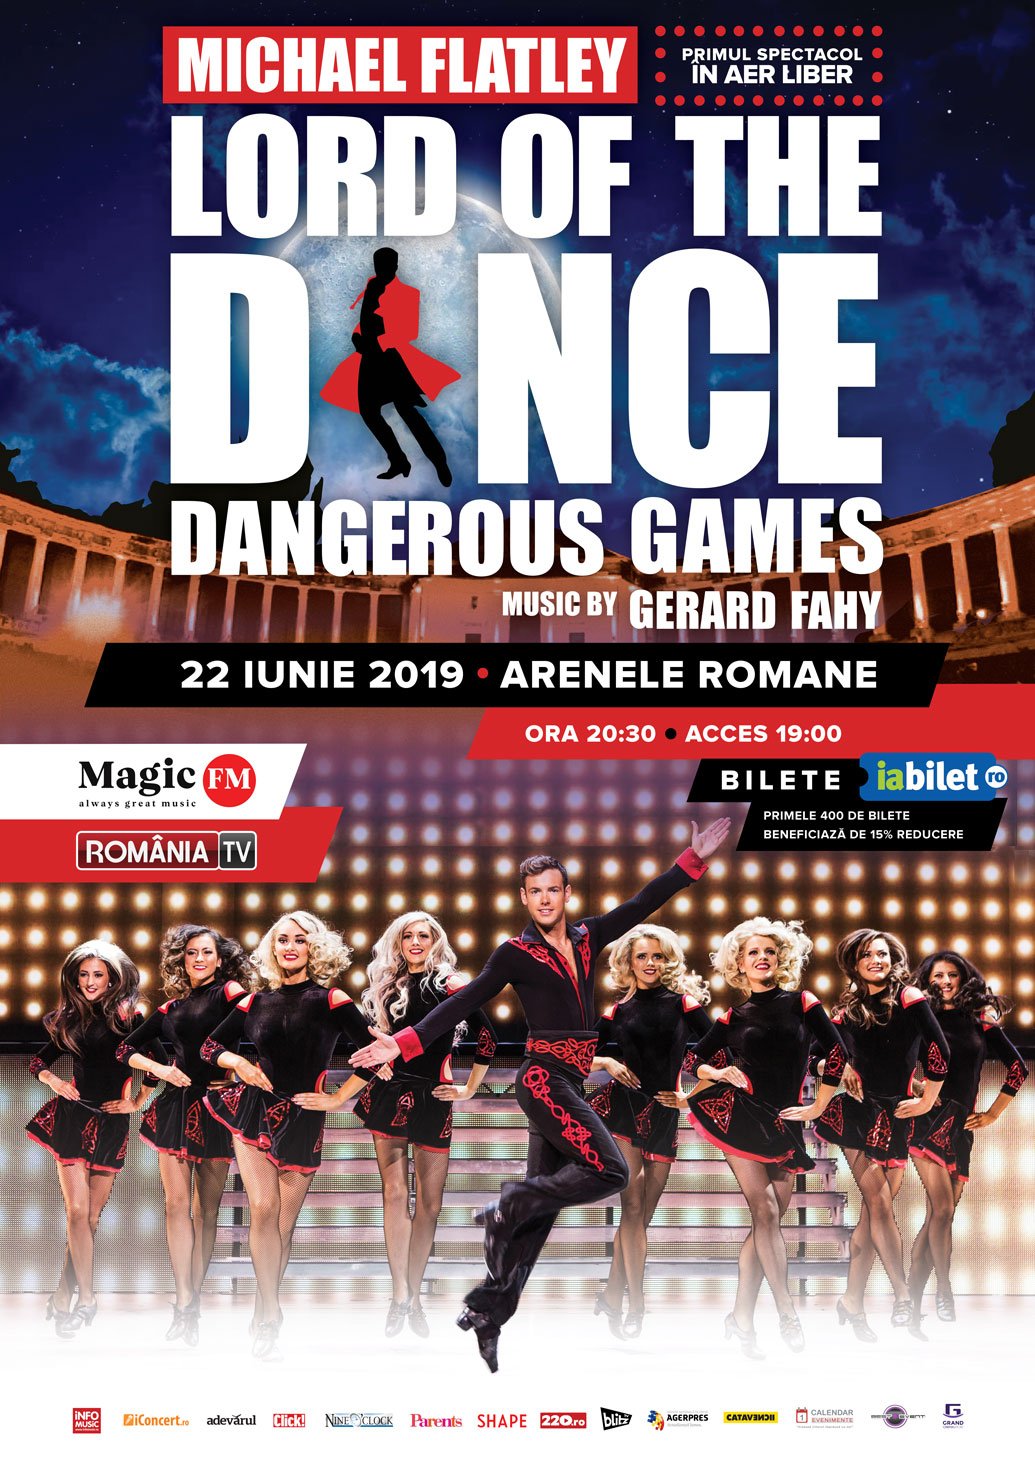 LORD OF THE DANCE – ”DANGEROUS GAMES